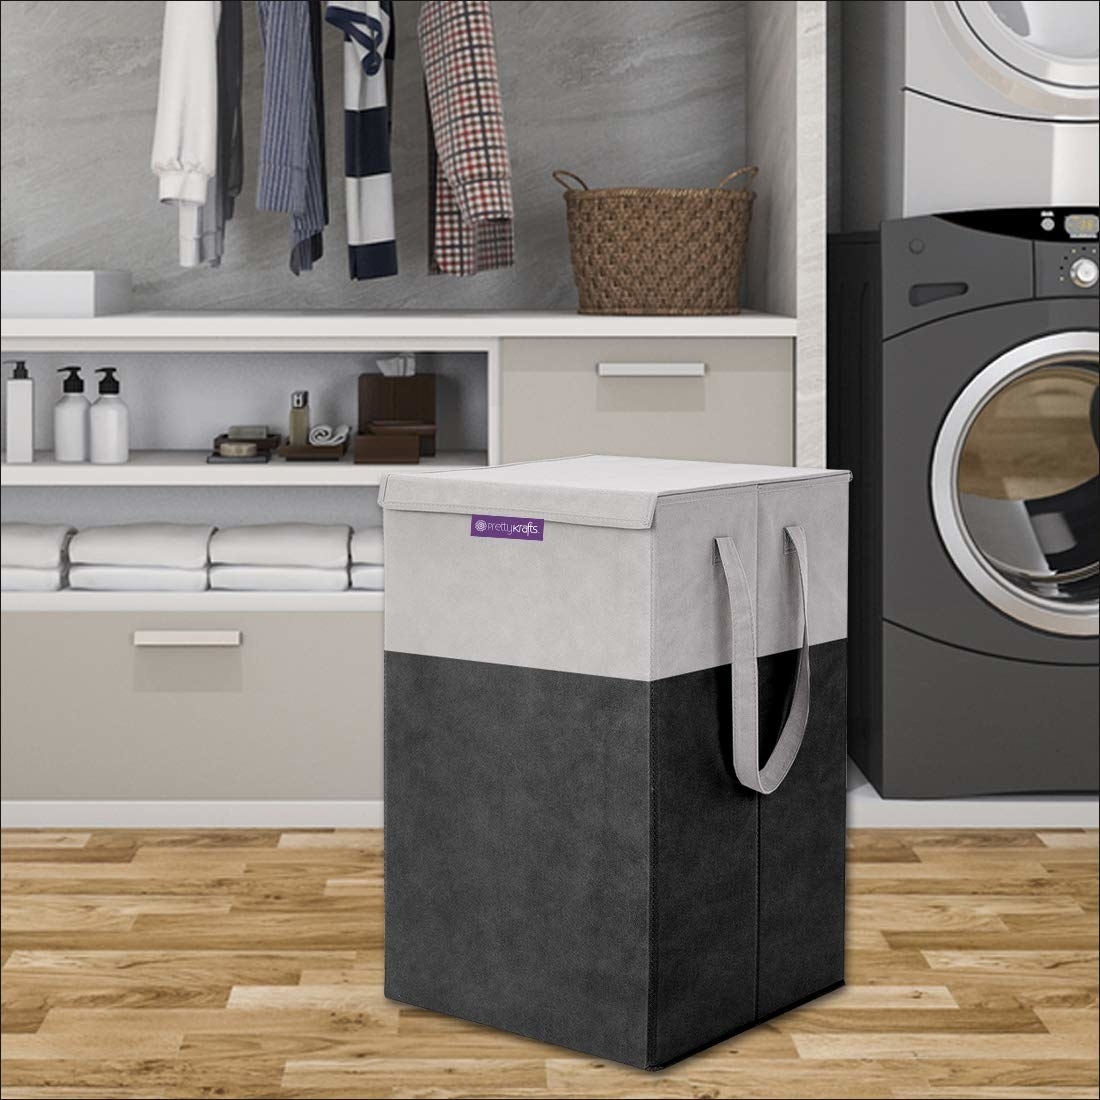 A grey laundry bag with some laundry supplies beside it and a washing machine